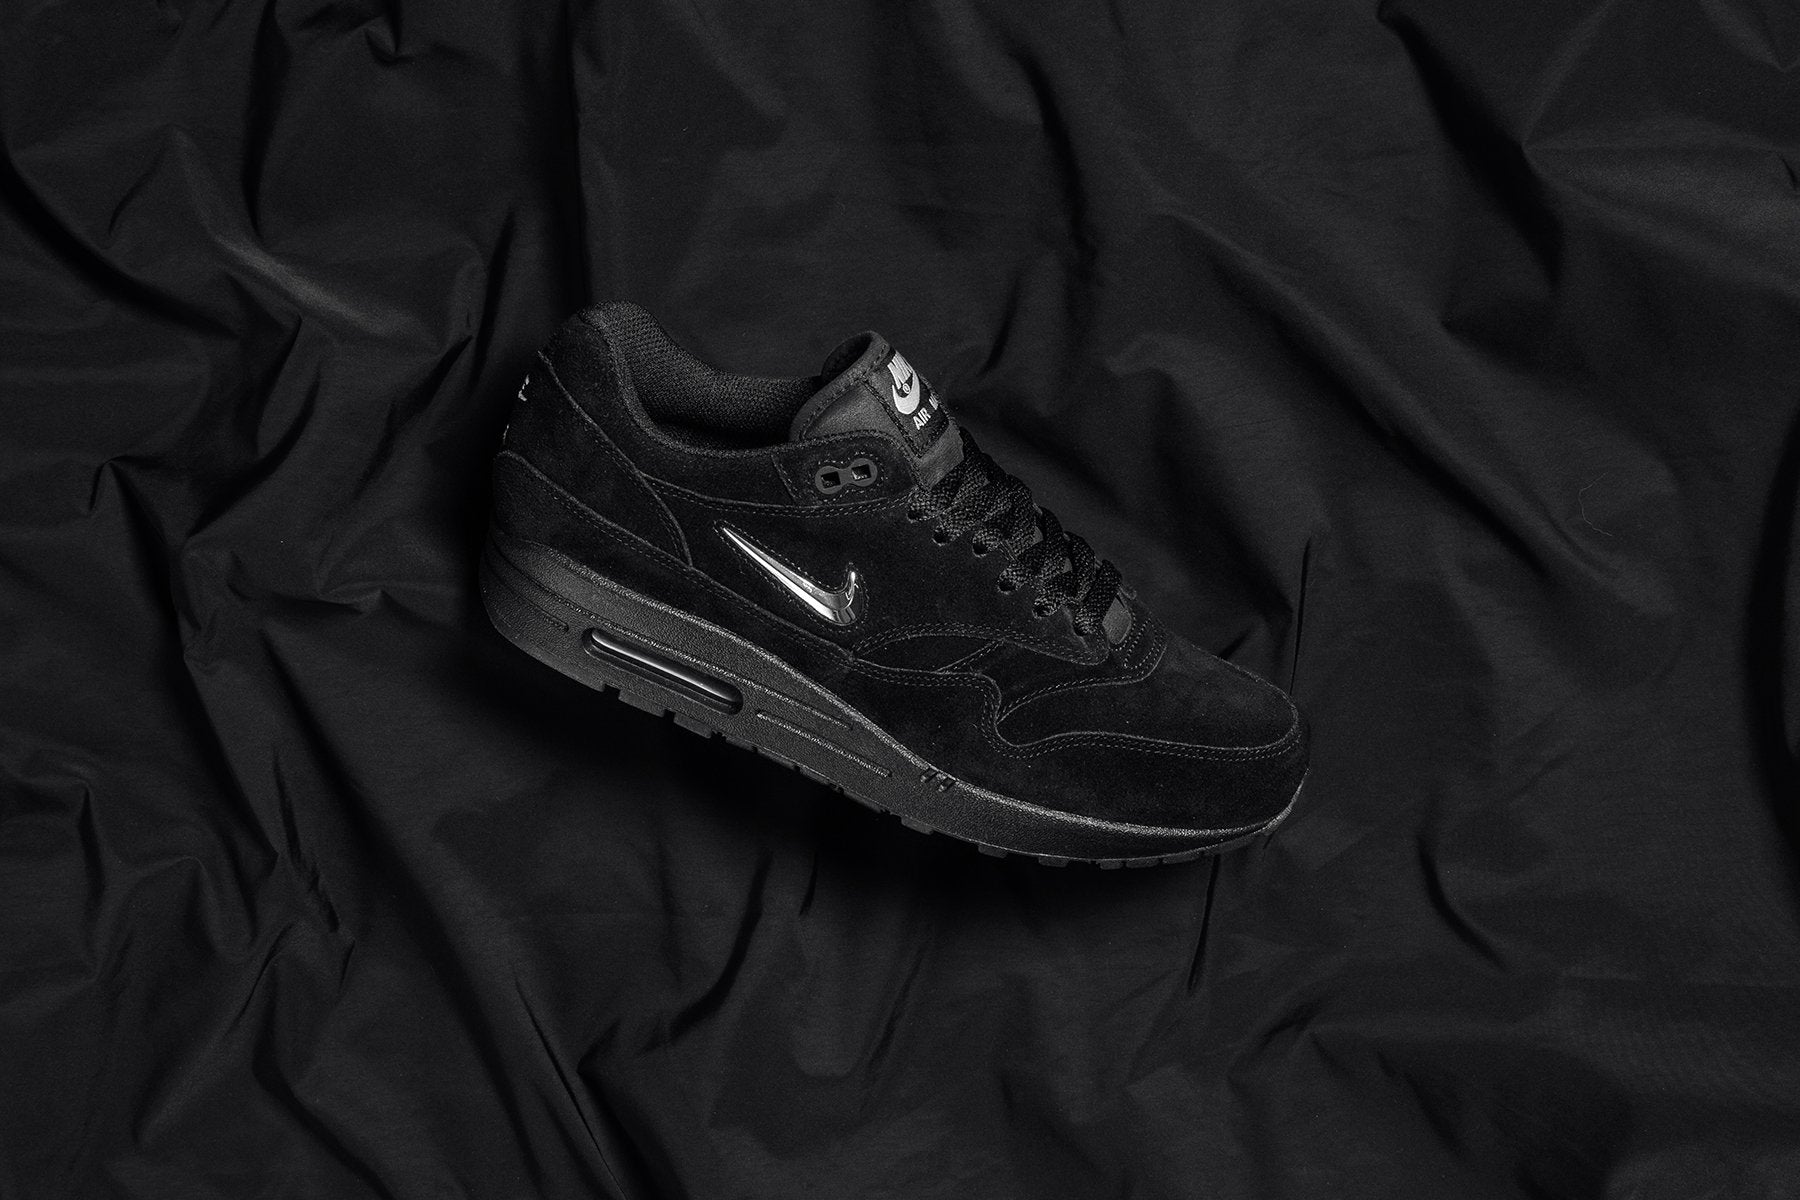 Air Max 1 Premium Jewel "Black/Chrome" Available Now – Feature